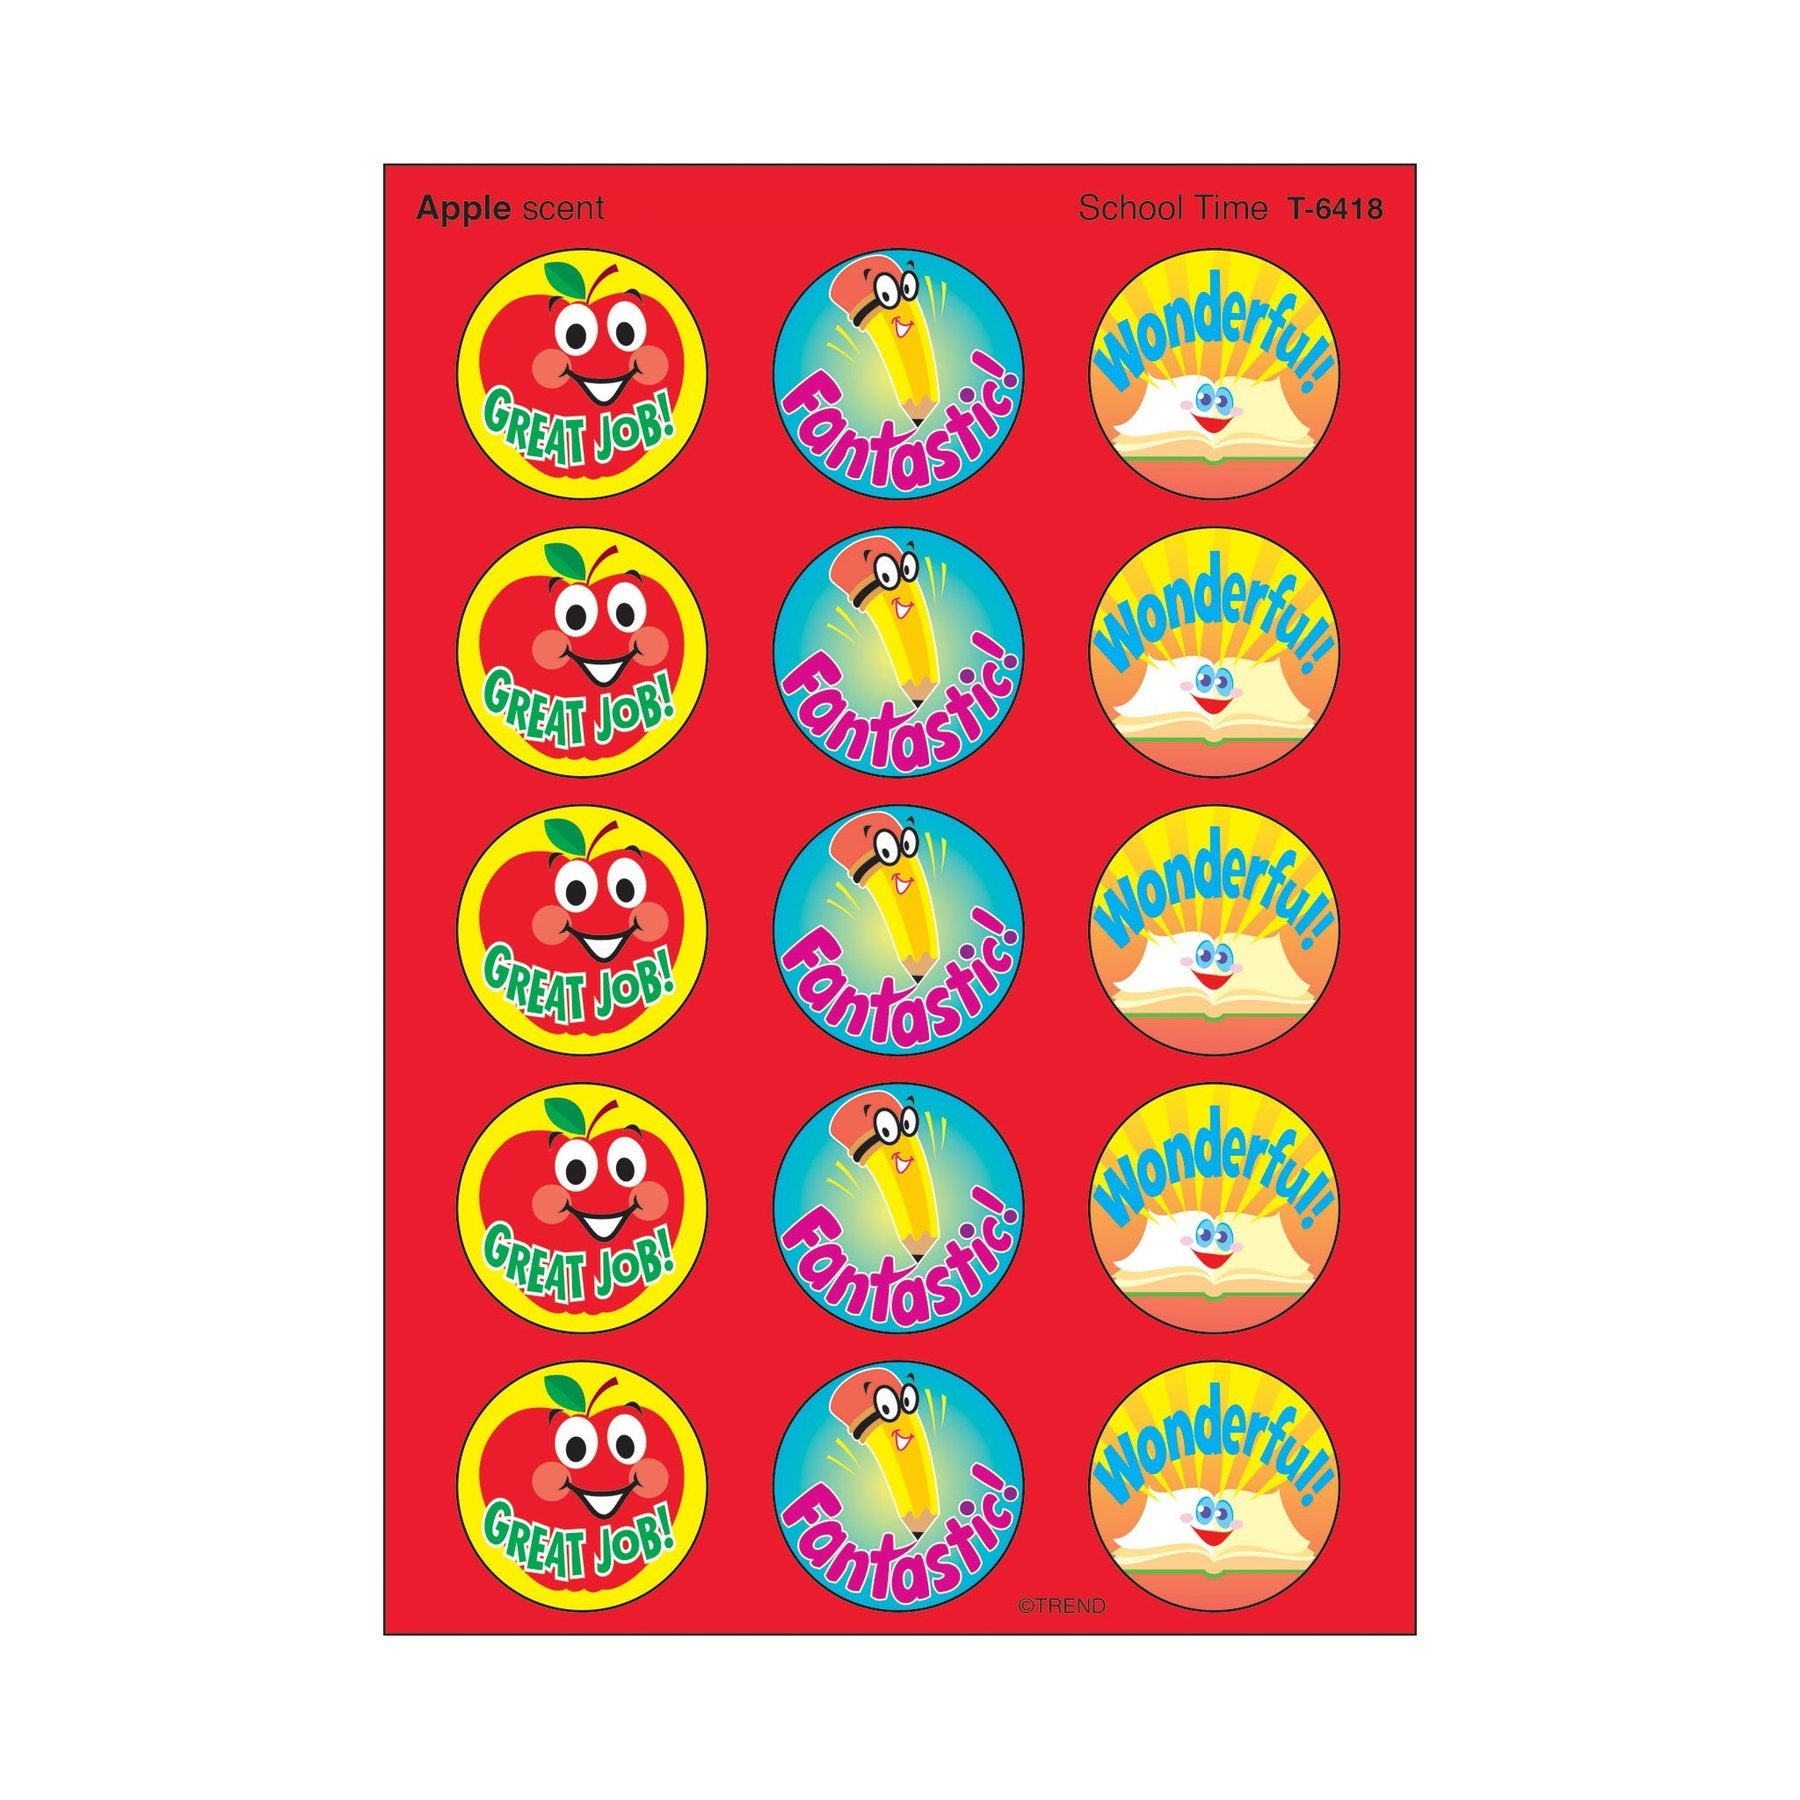 School Time, Apple scent Scratch 'n Sniff Stinky Stickers® – Large Round